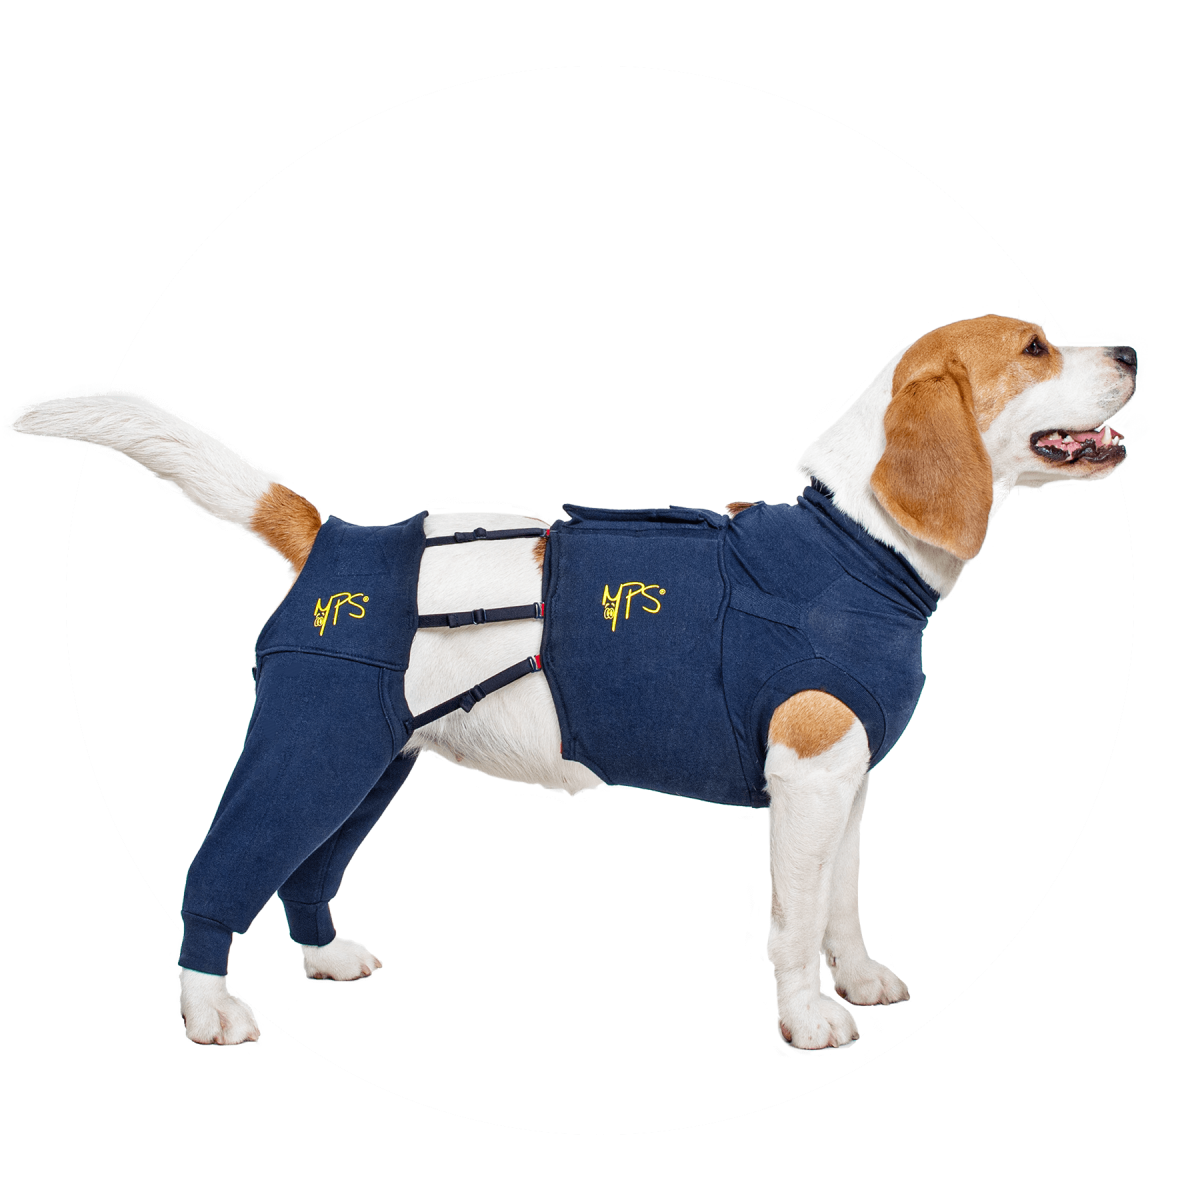 Medical Pet Shirts - Covering and protective products for pets.